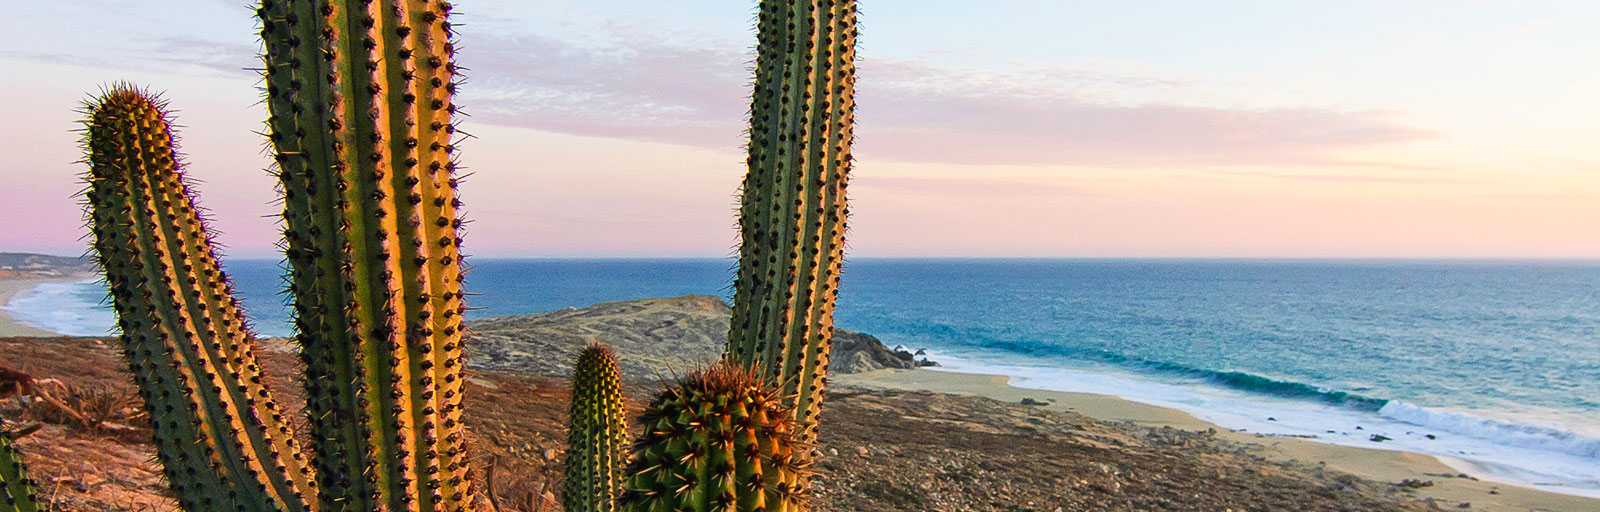 Hiking & Yoga Retreat in Mexico: Pitaya Cactus and Ocean View at Sunset